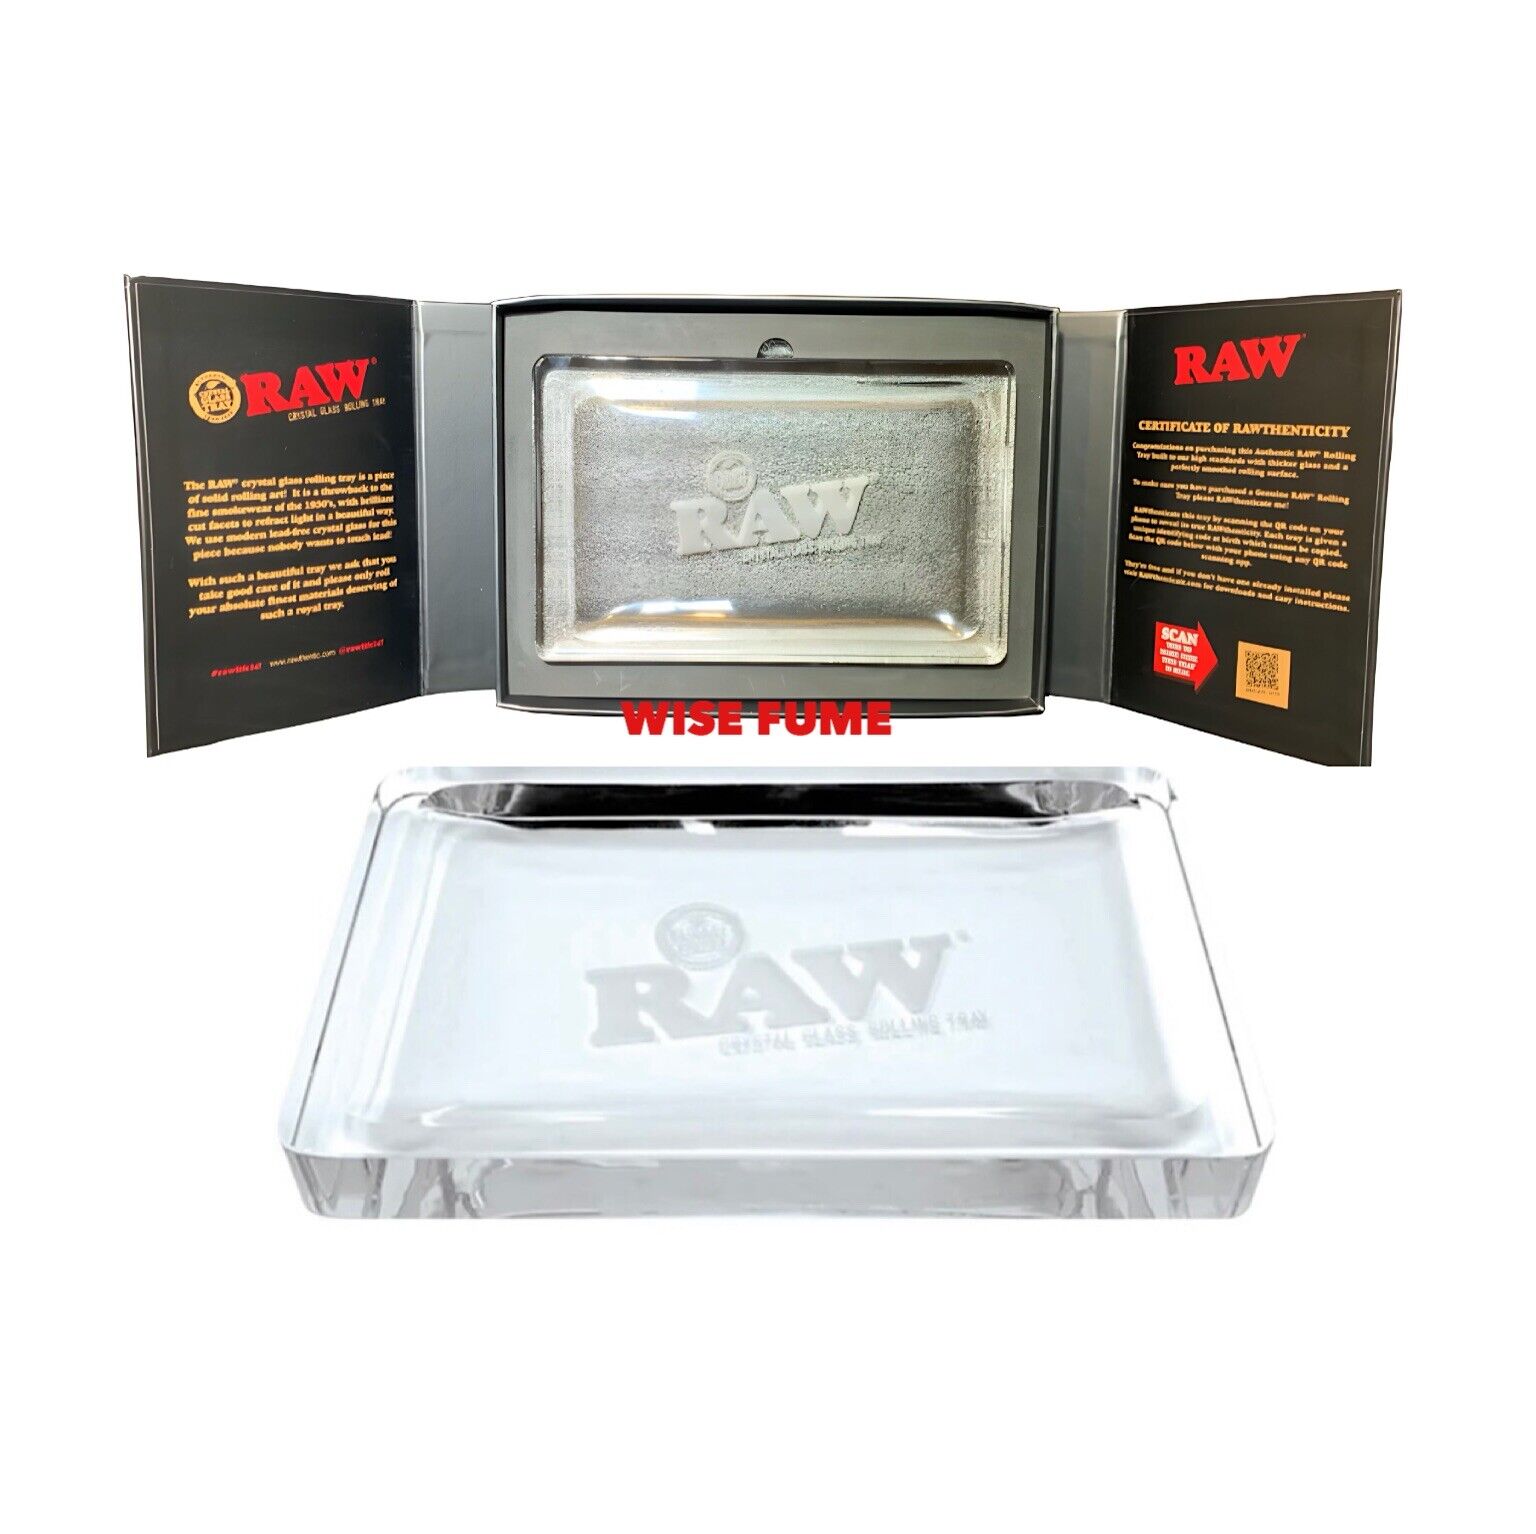 RAW CRYSTAL GLASS ROLLING TRAY 6LBS LIMITED EDITION new packaging